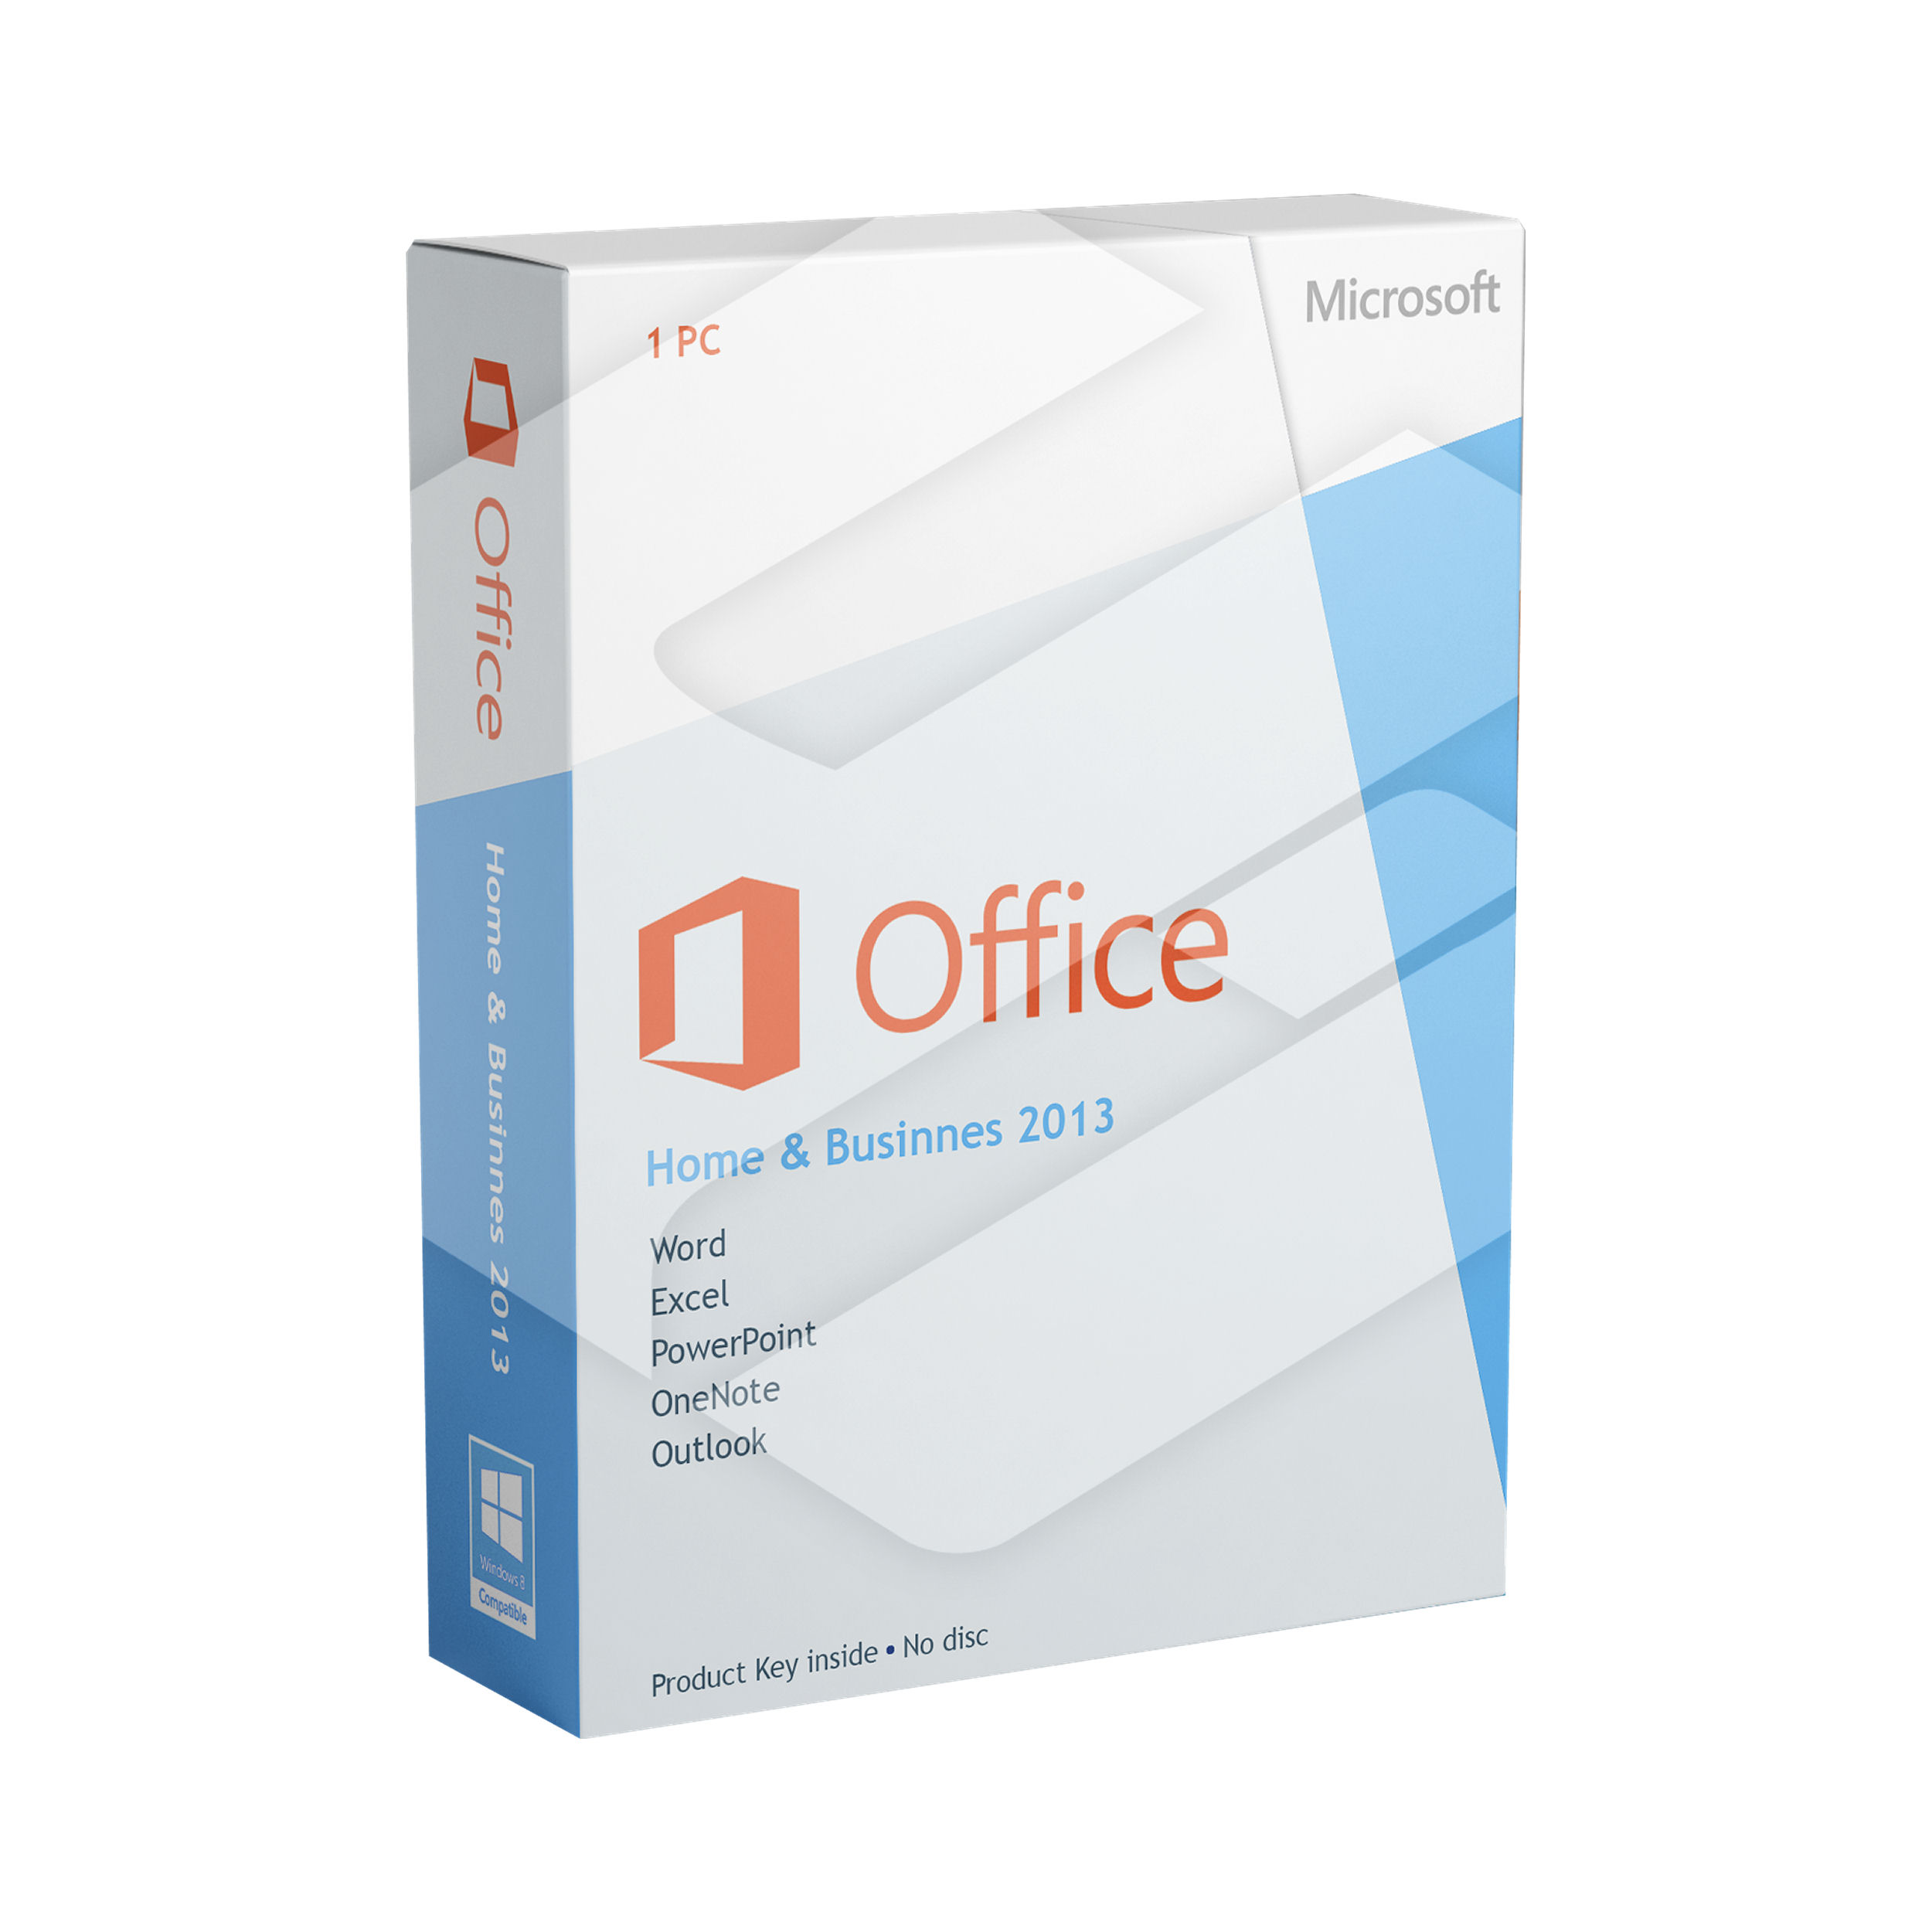 Microsoft Office 2013 Home & Business | SW10029